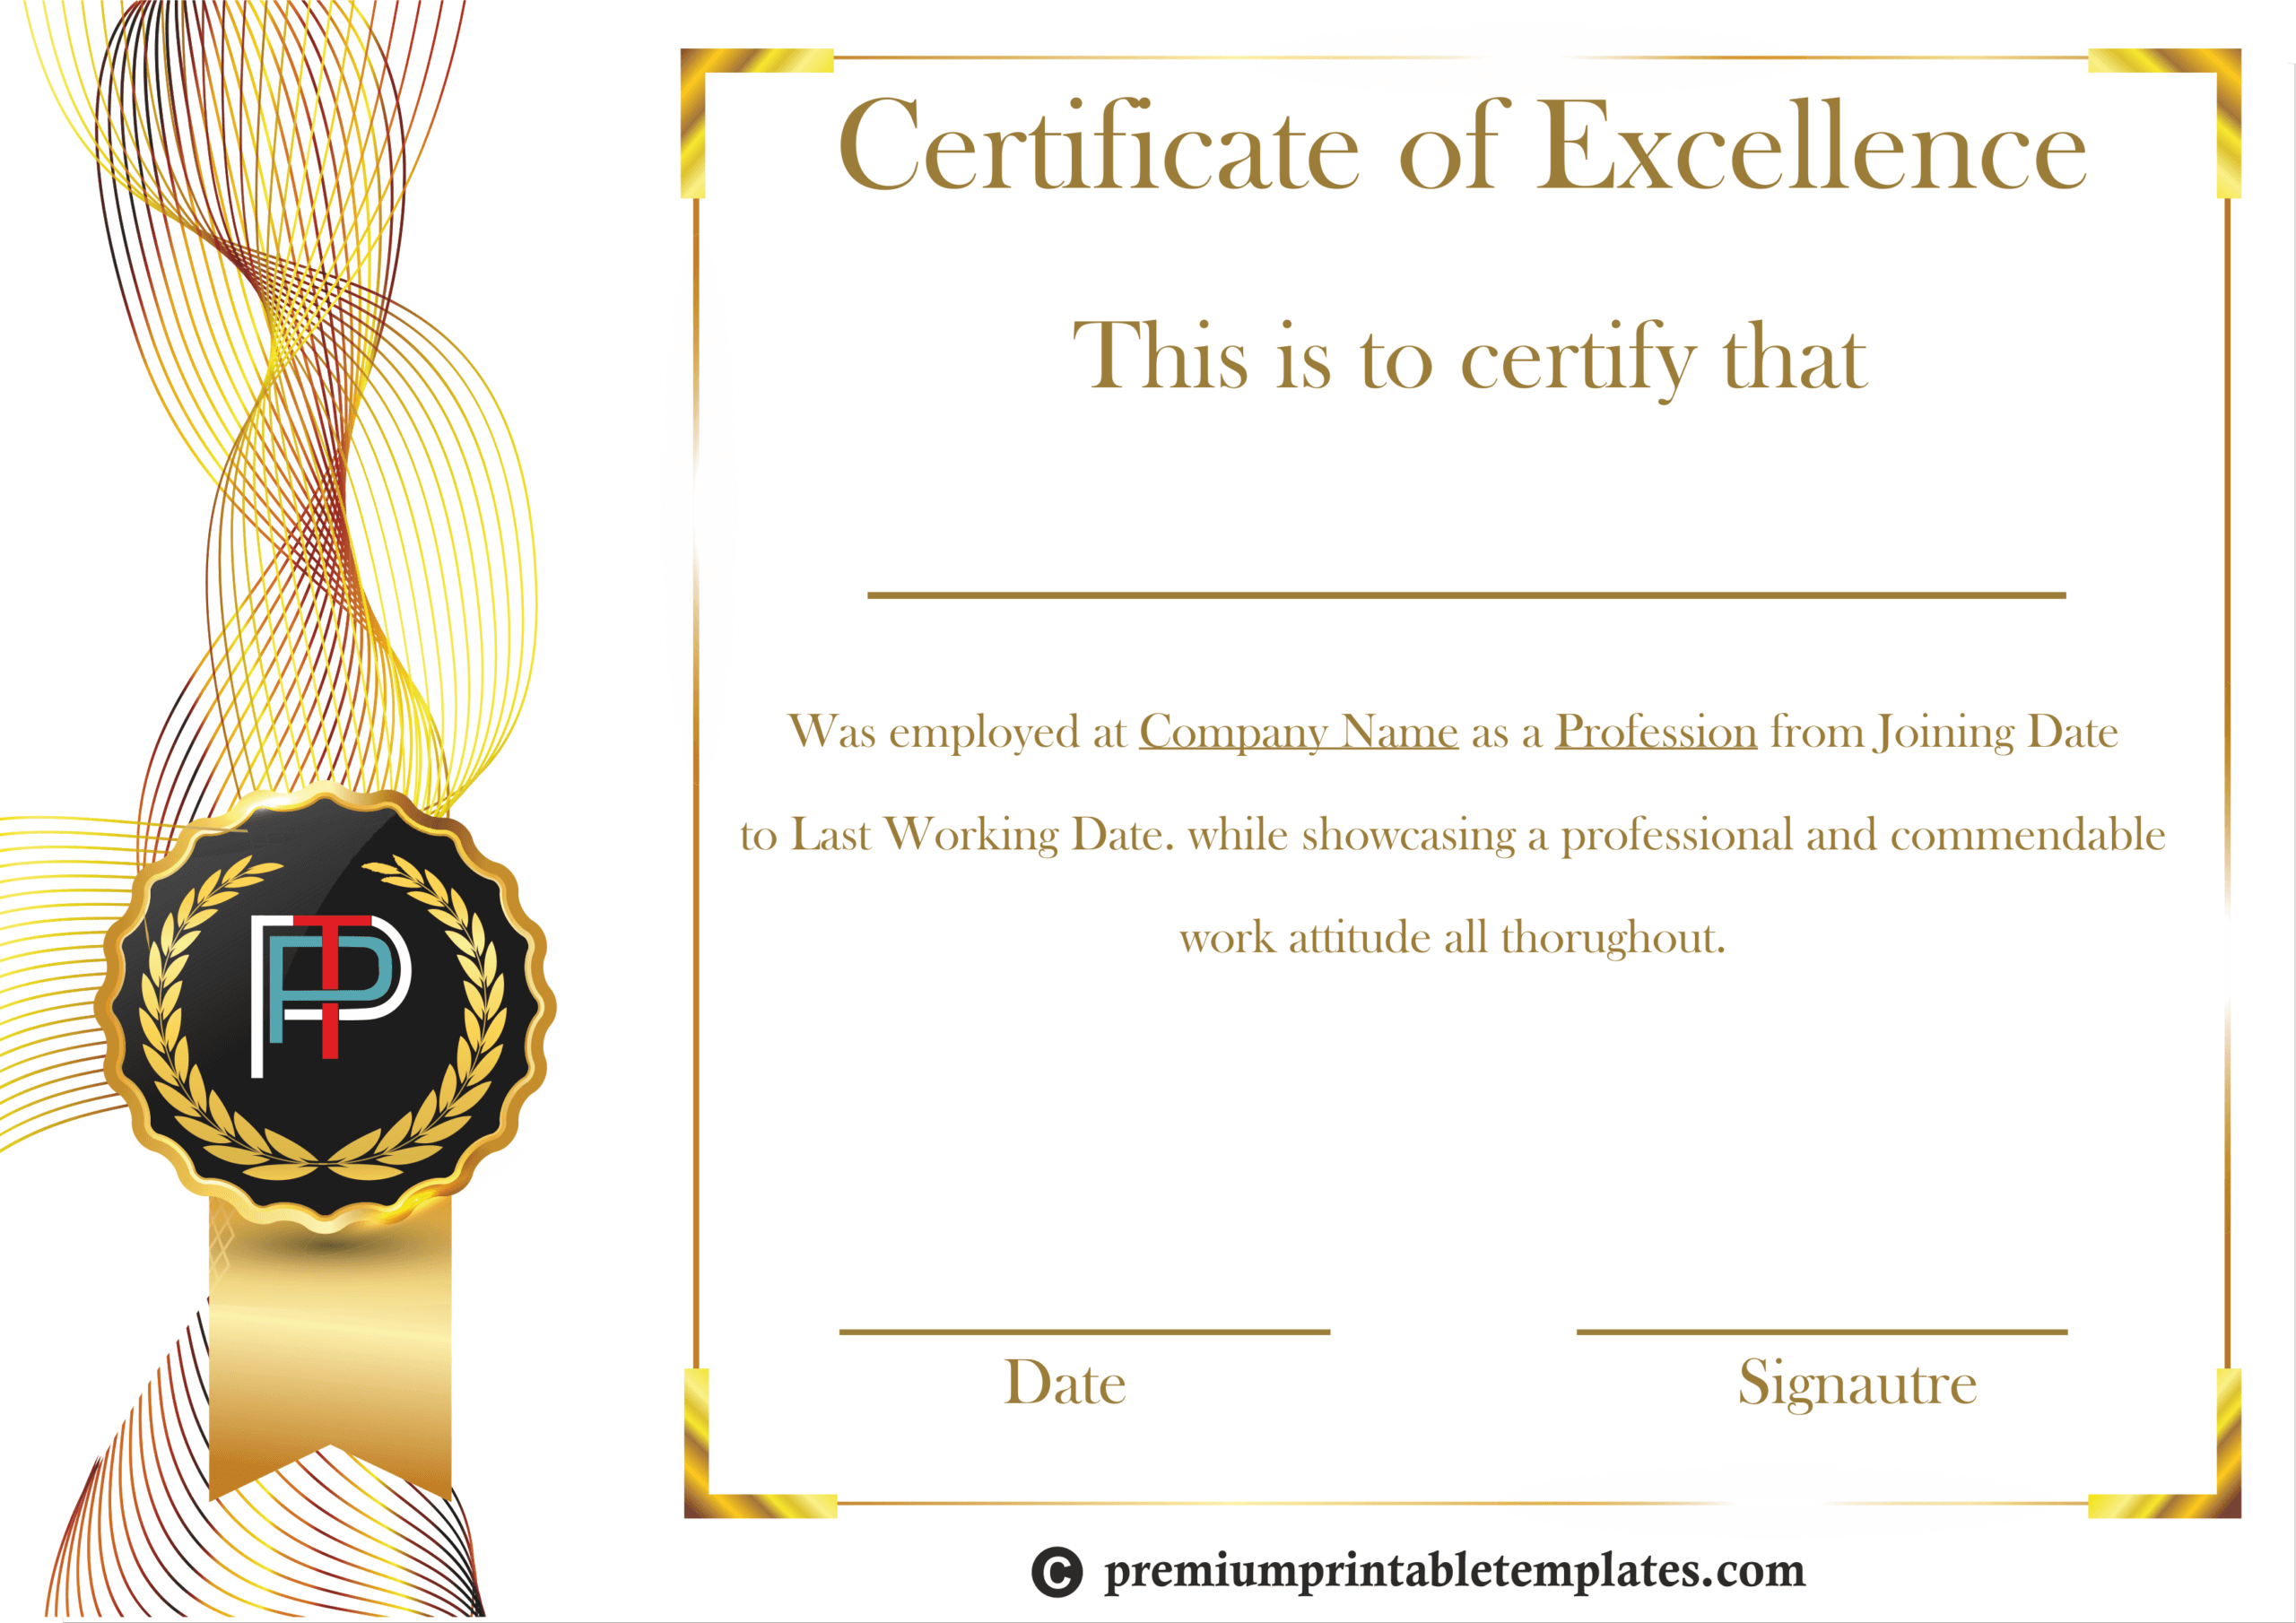 Certificate Of Excellence Template | Certificate Templates For Best Performance Certificate Template